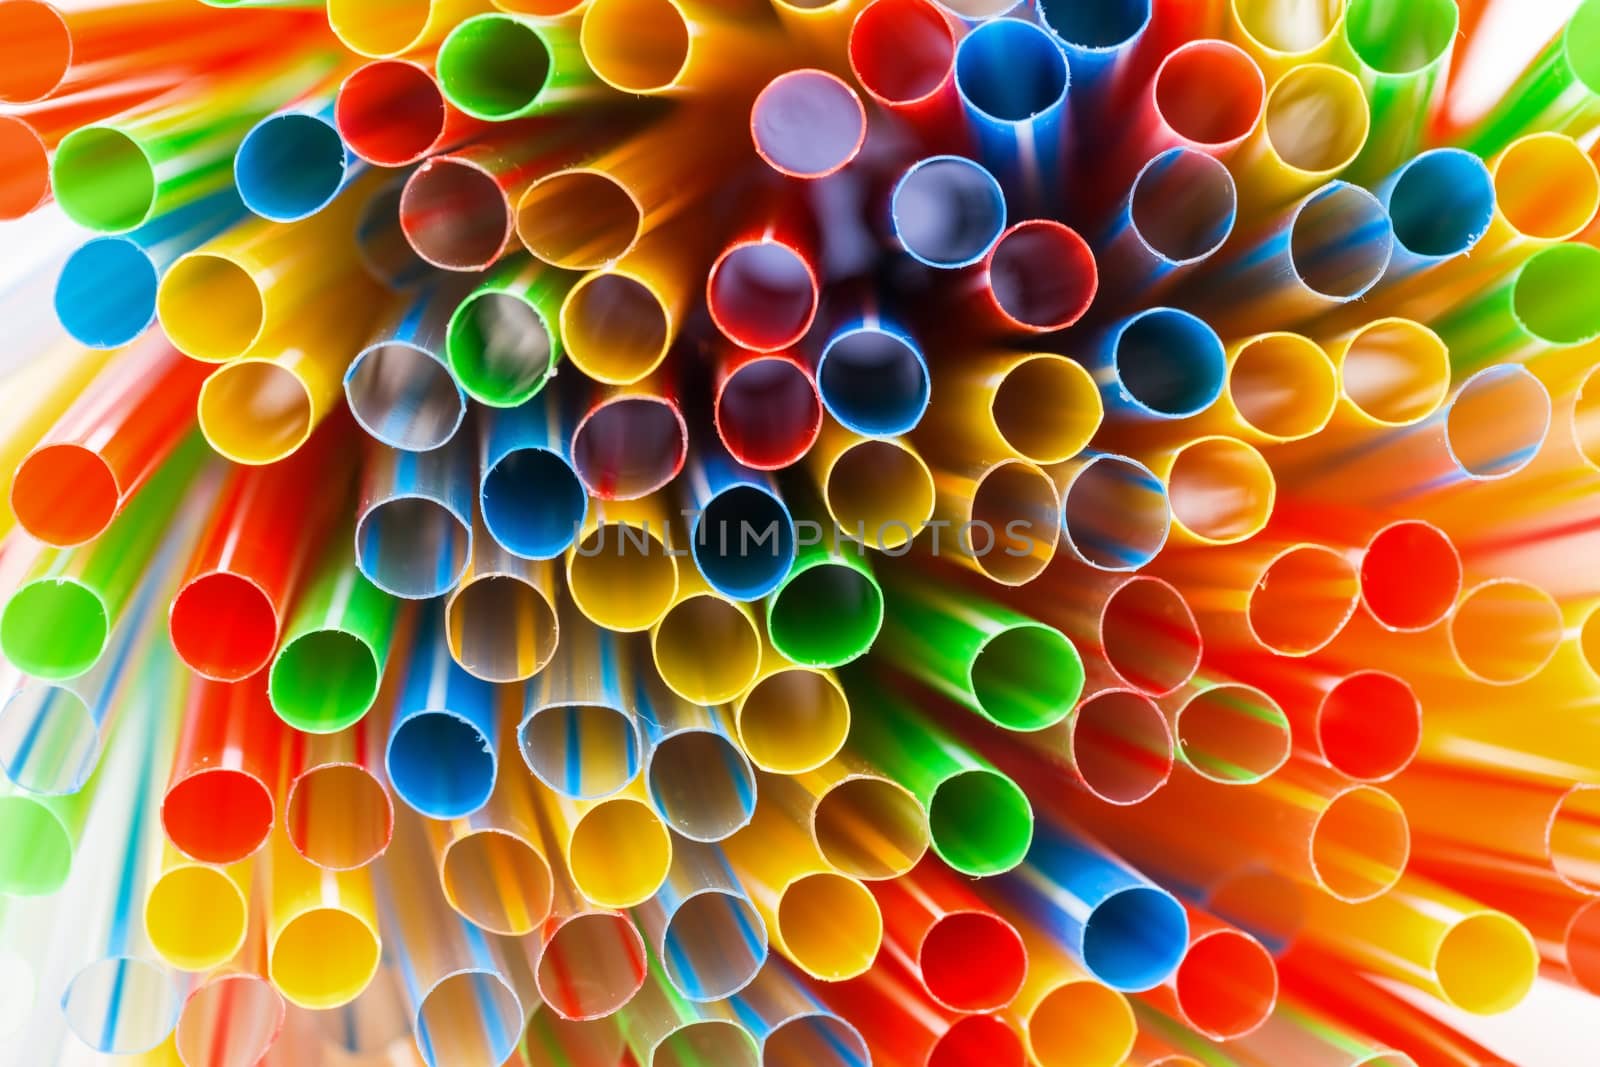 Colored Plastic Drinking Straws closeup by Discovod